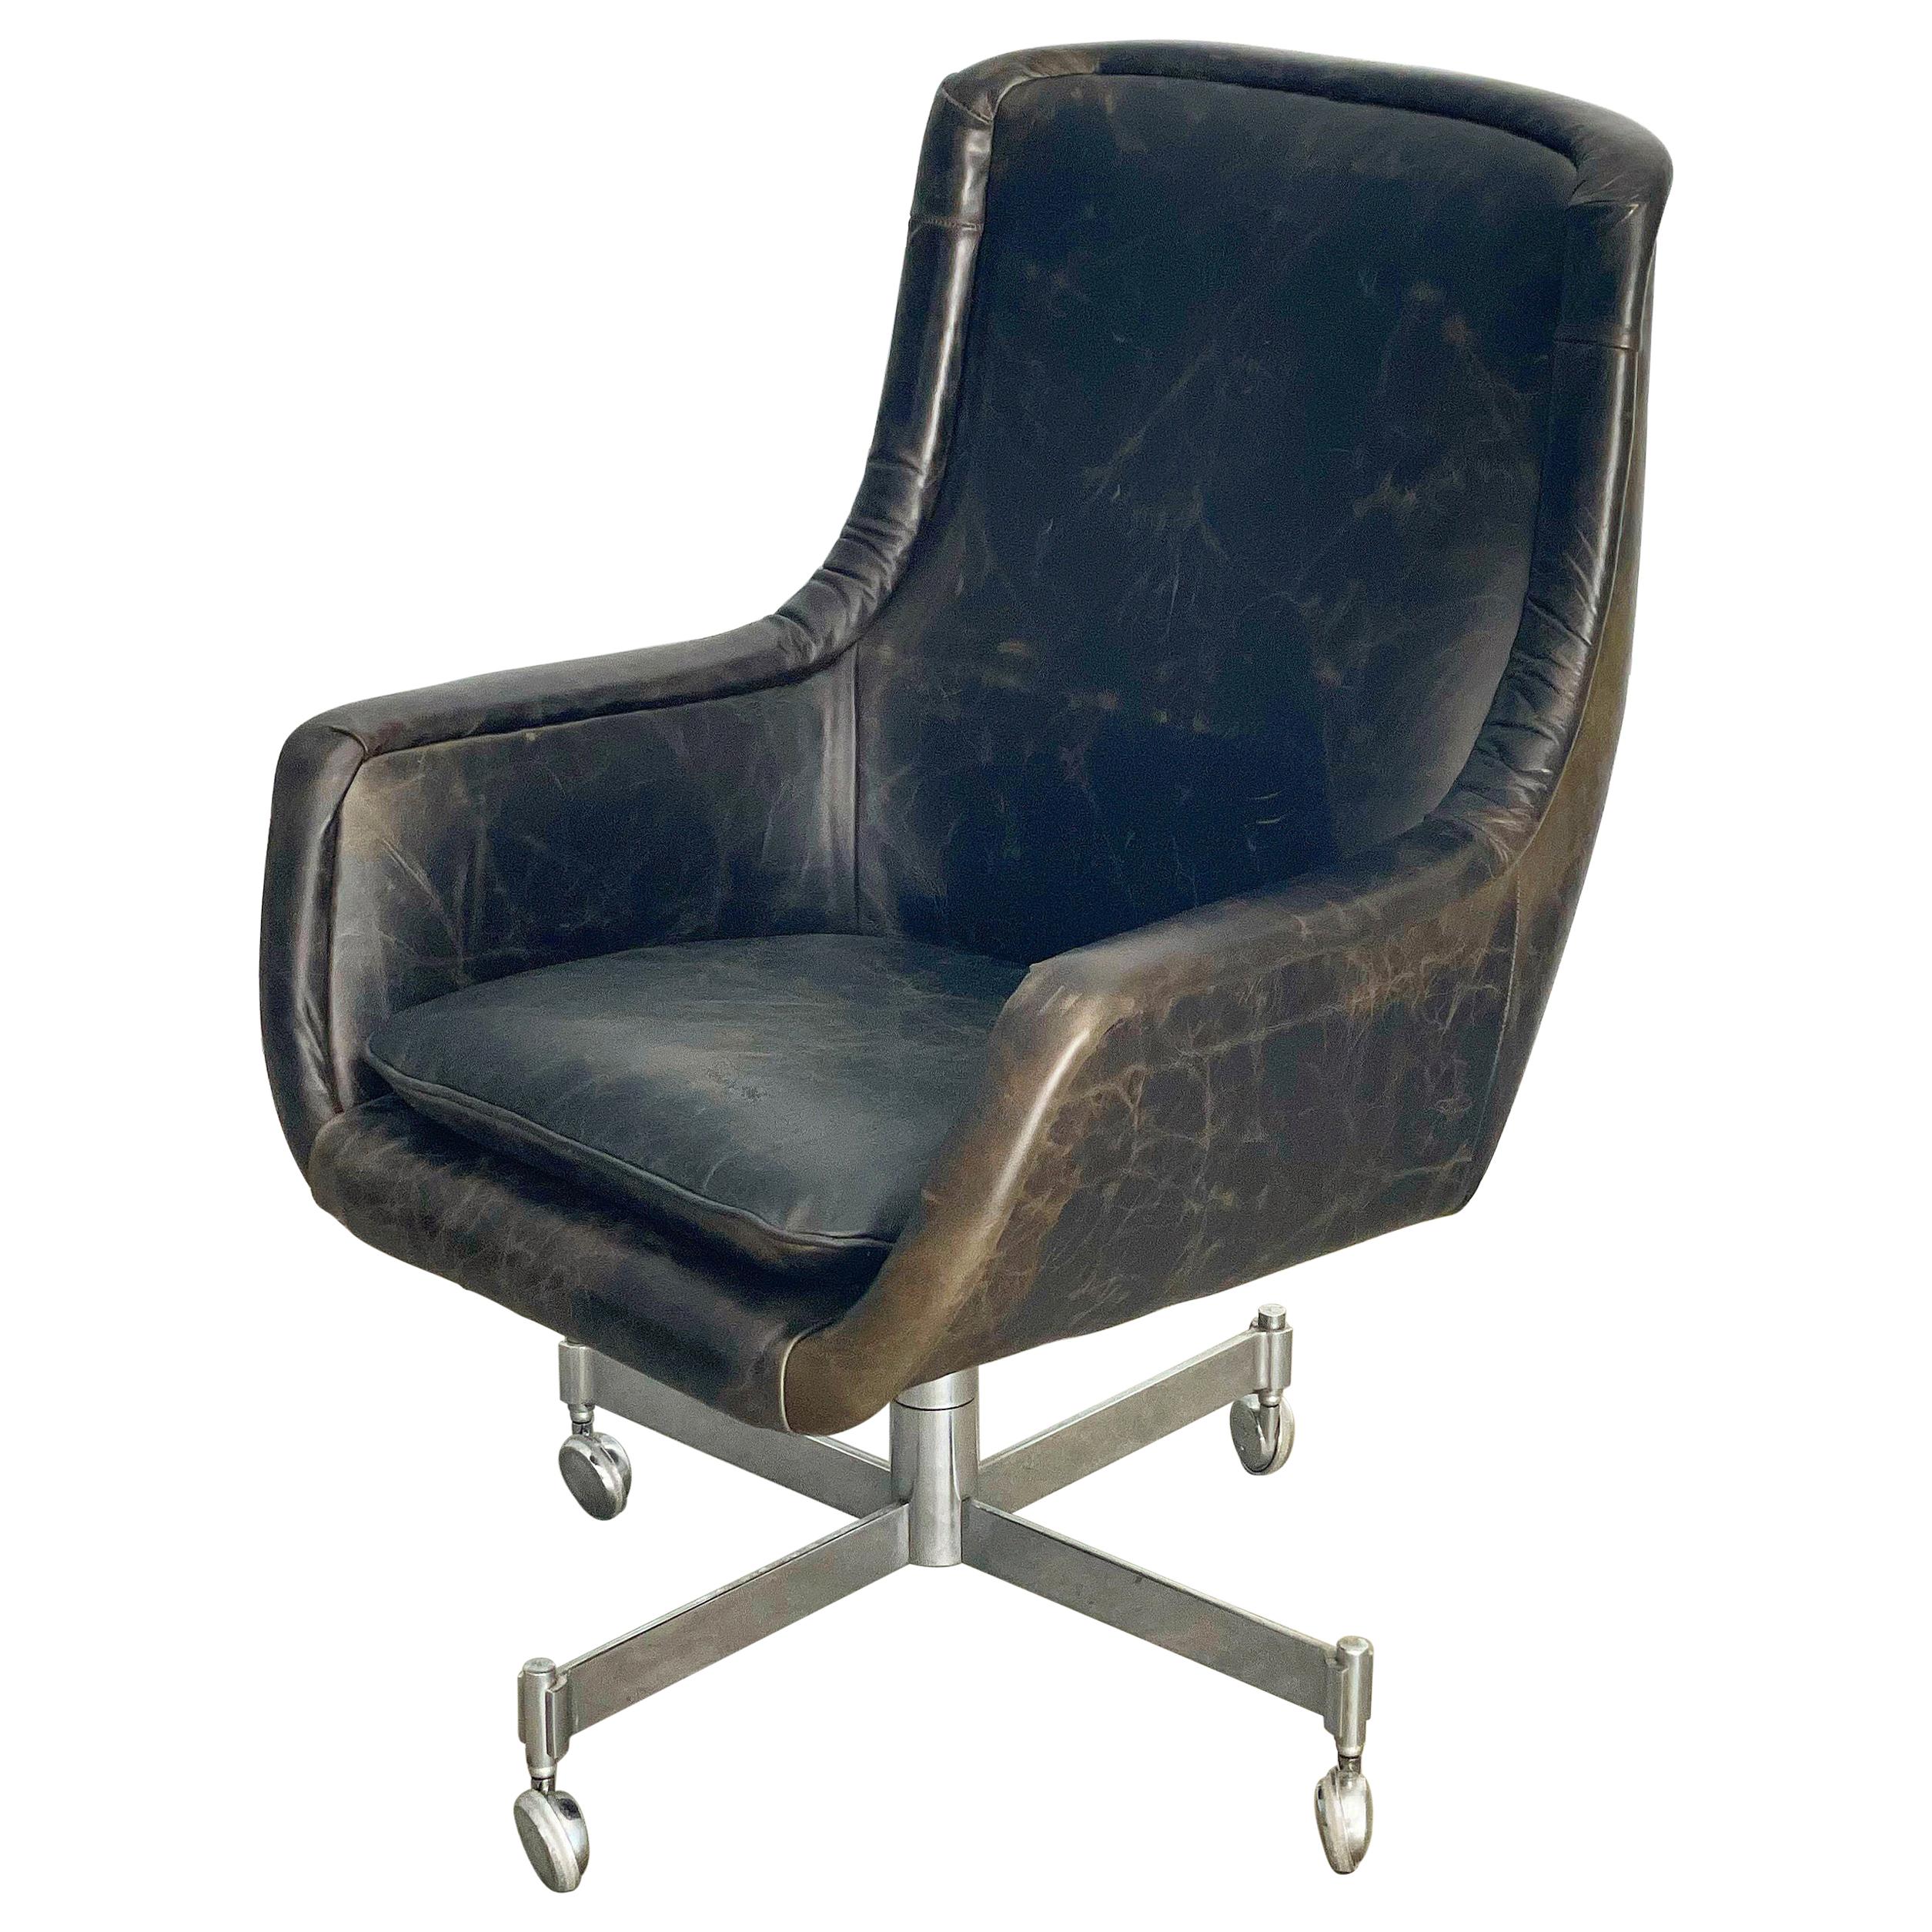 Ward Bennett High Back Executive Desk Chair in Aniline Leather, for Brickel 1978